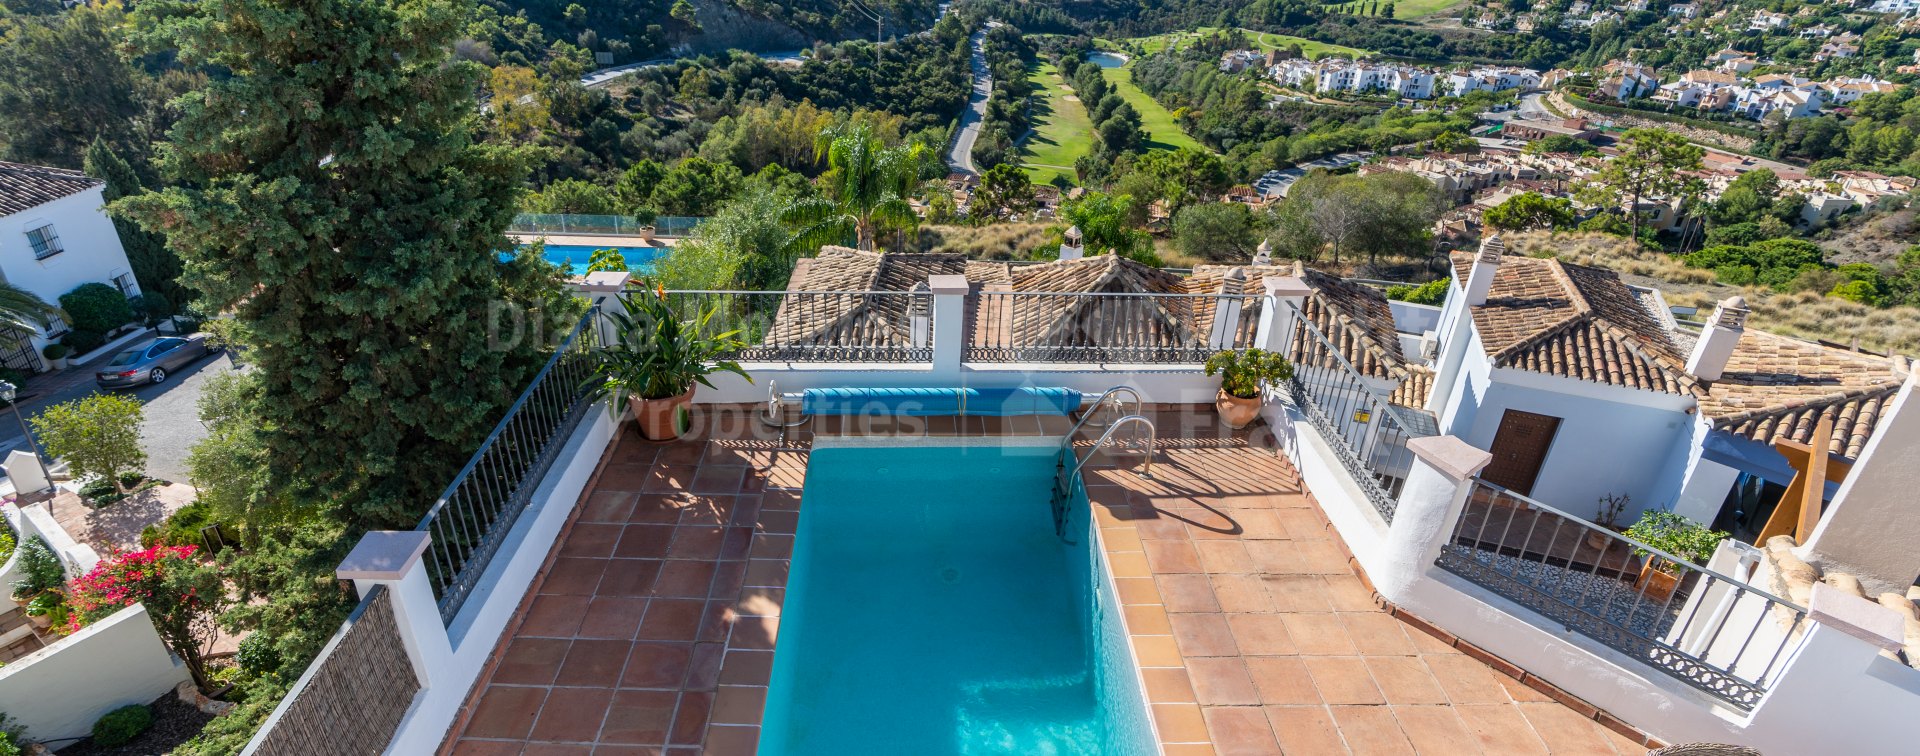 Enchanting three-bedroom townhouse with swimming pool in La Heredia